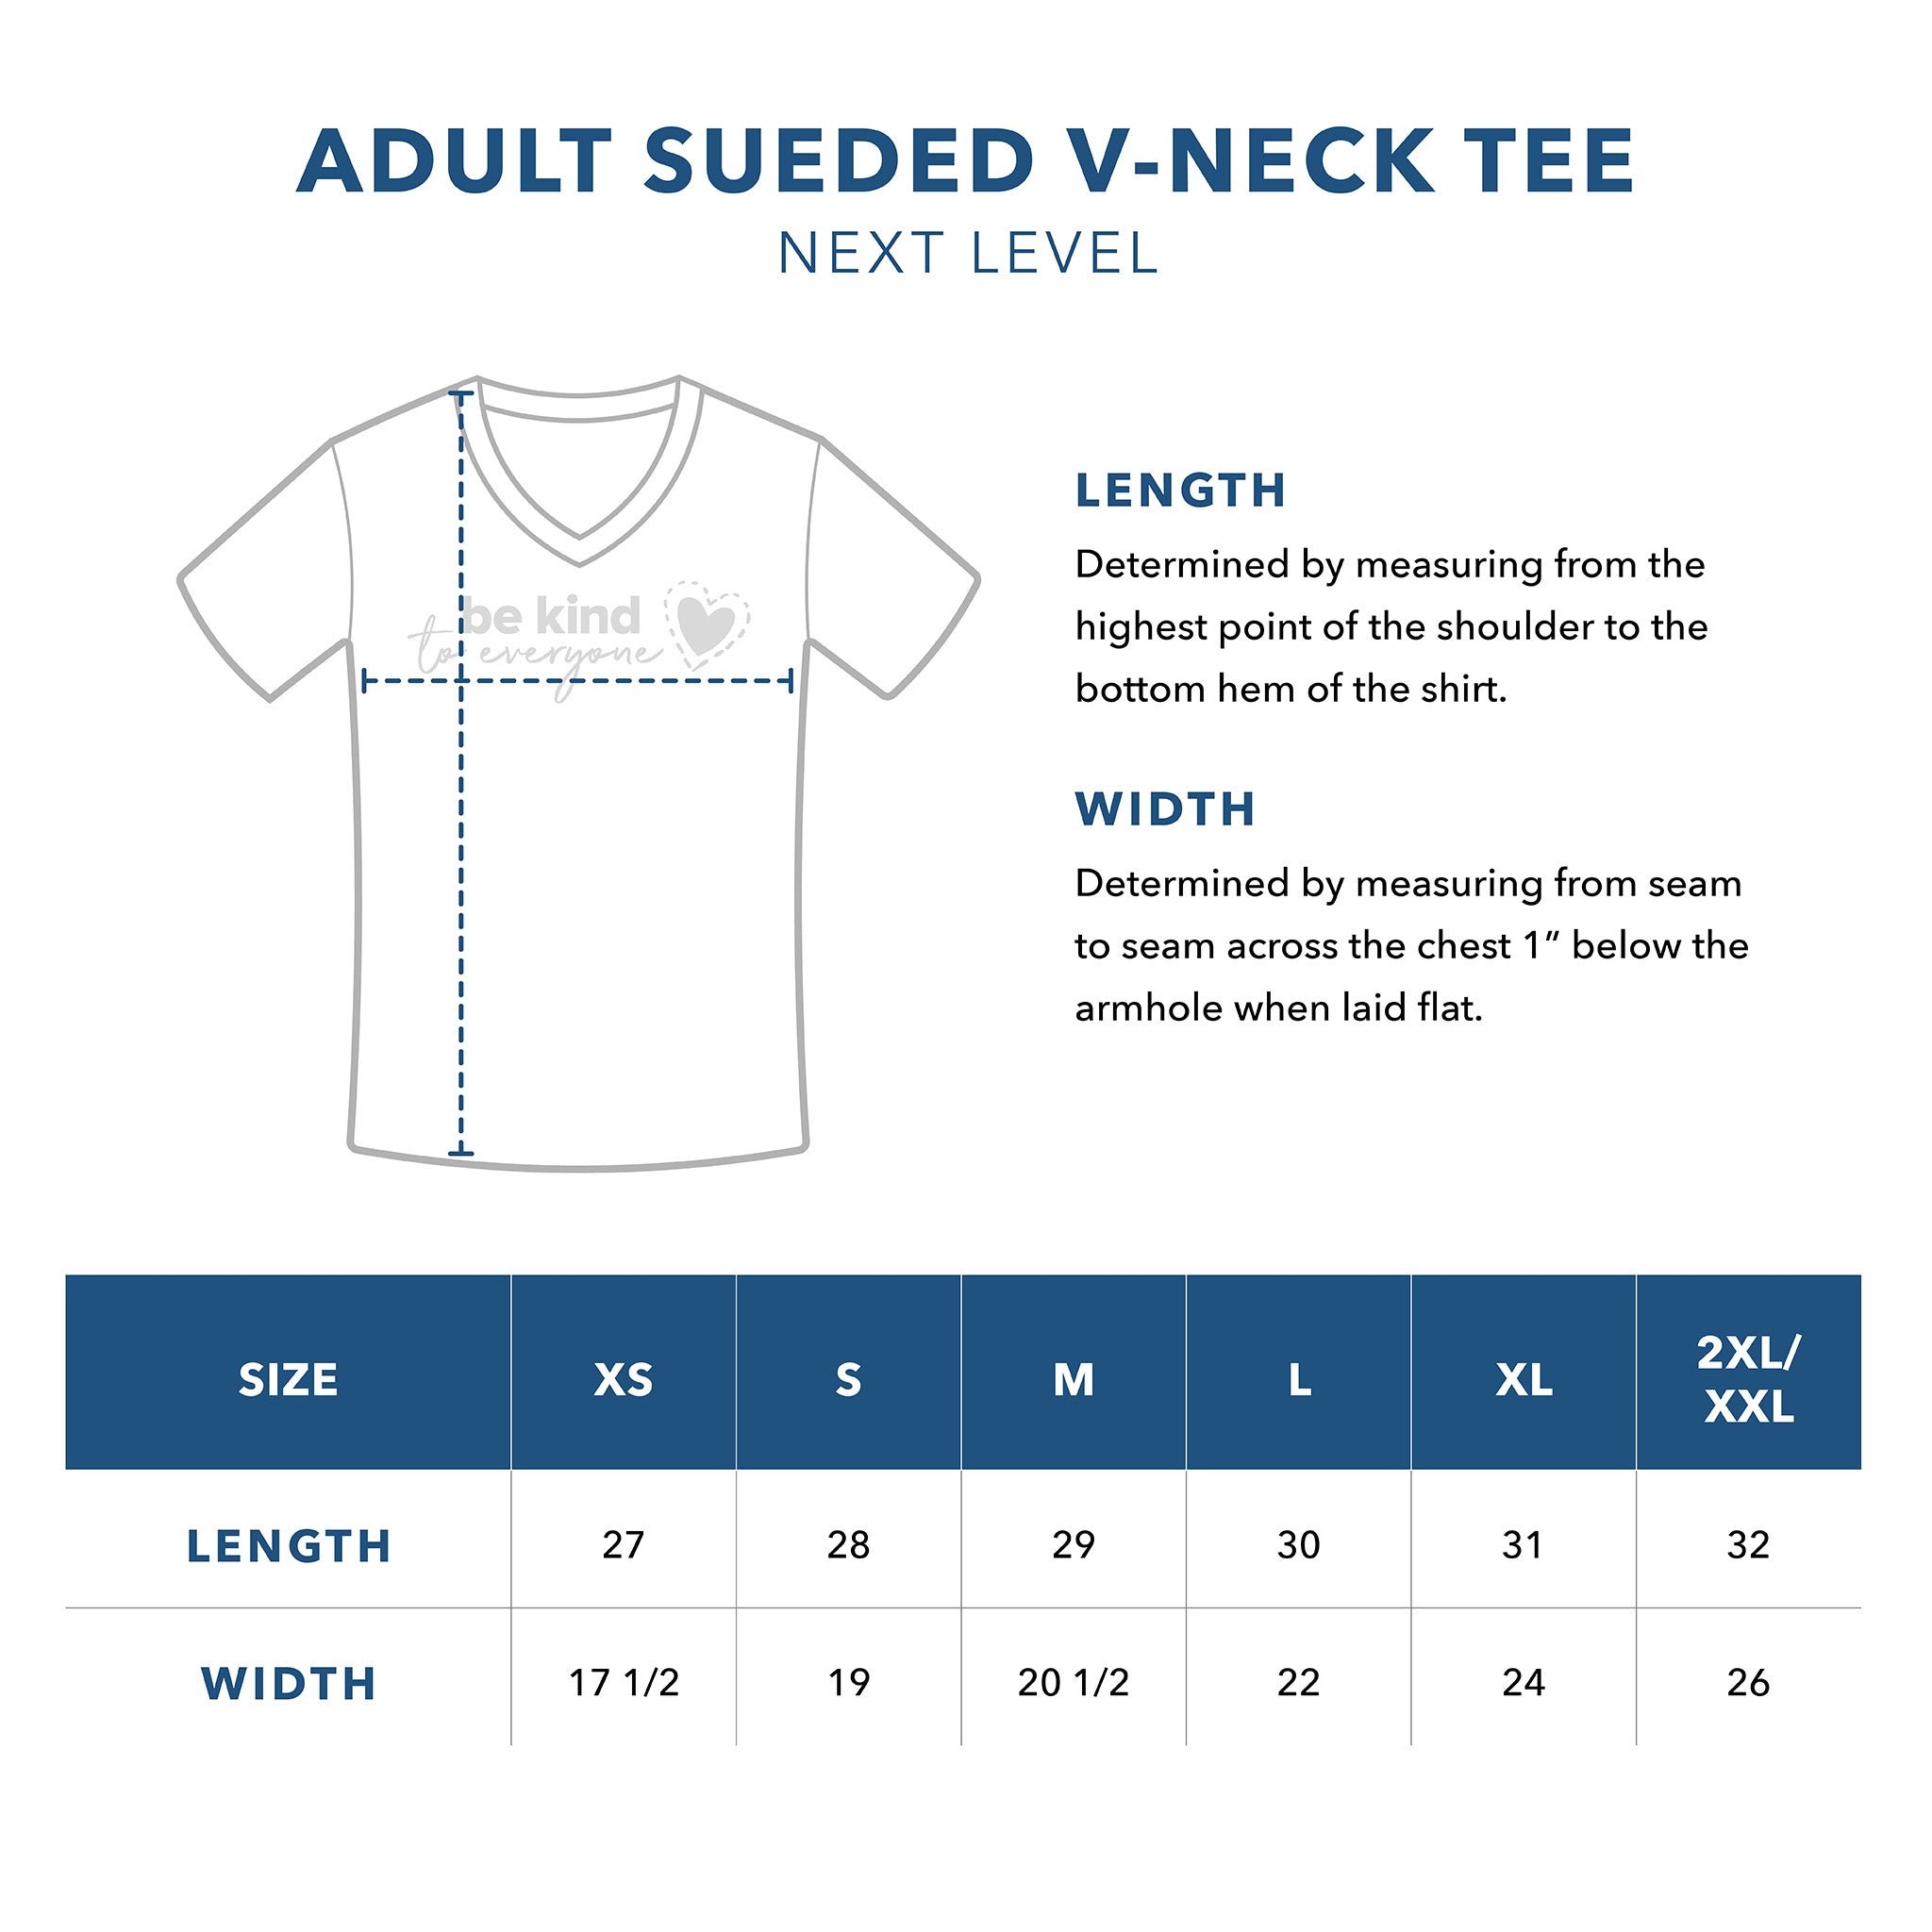 Next Level Adult Sueded V-Neck Sizing Guide